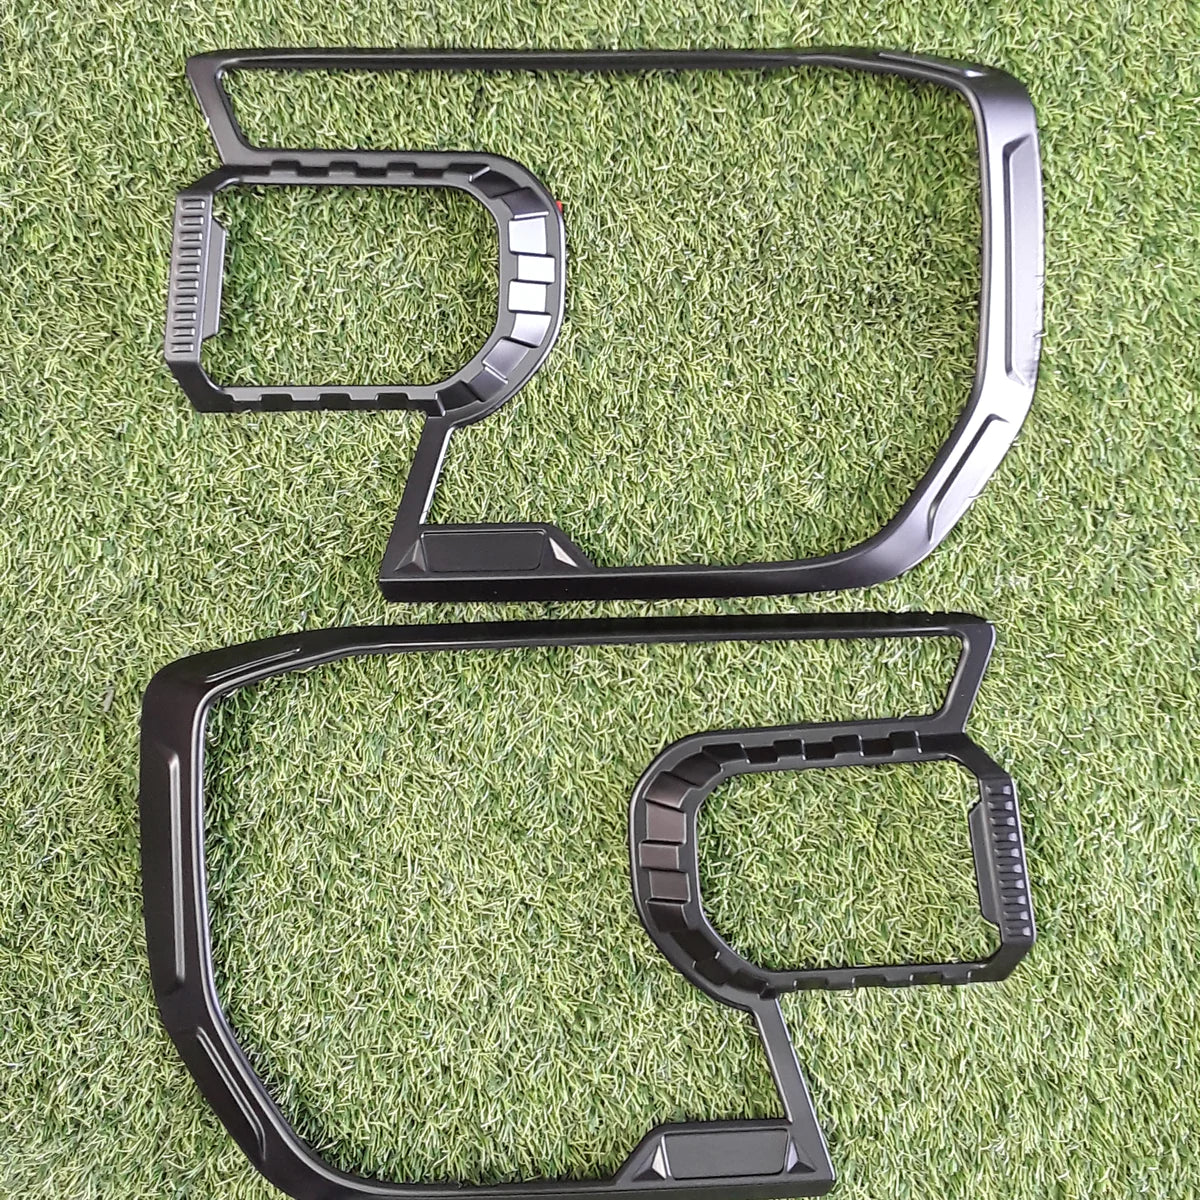 Ford Ranger 2023 Low version black headlight covers